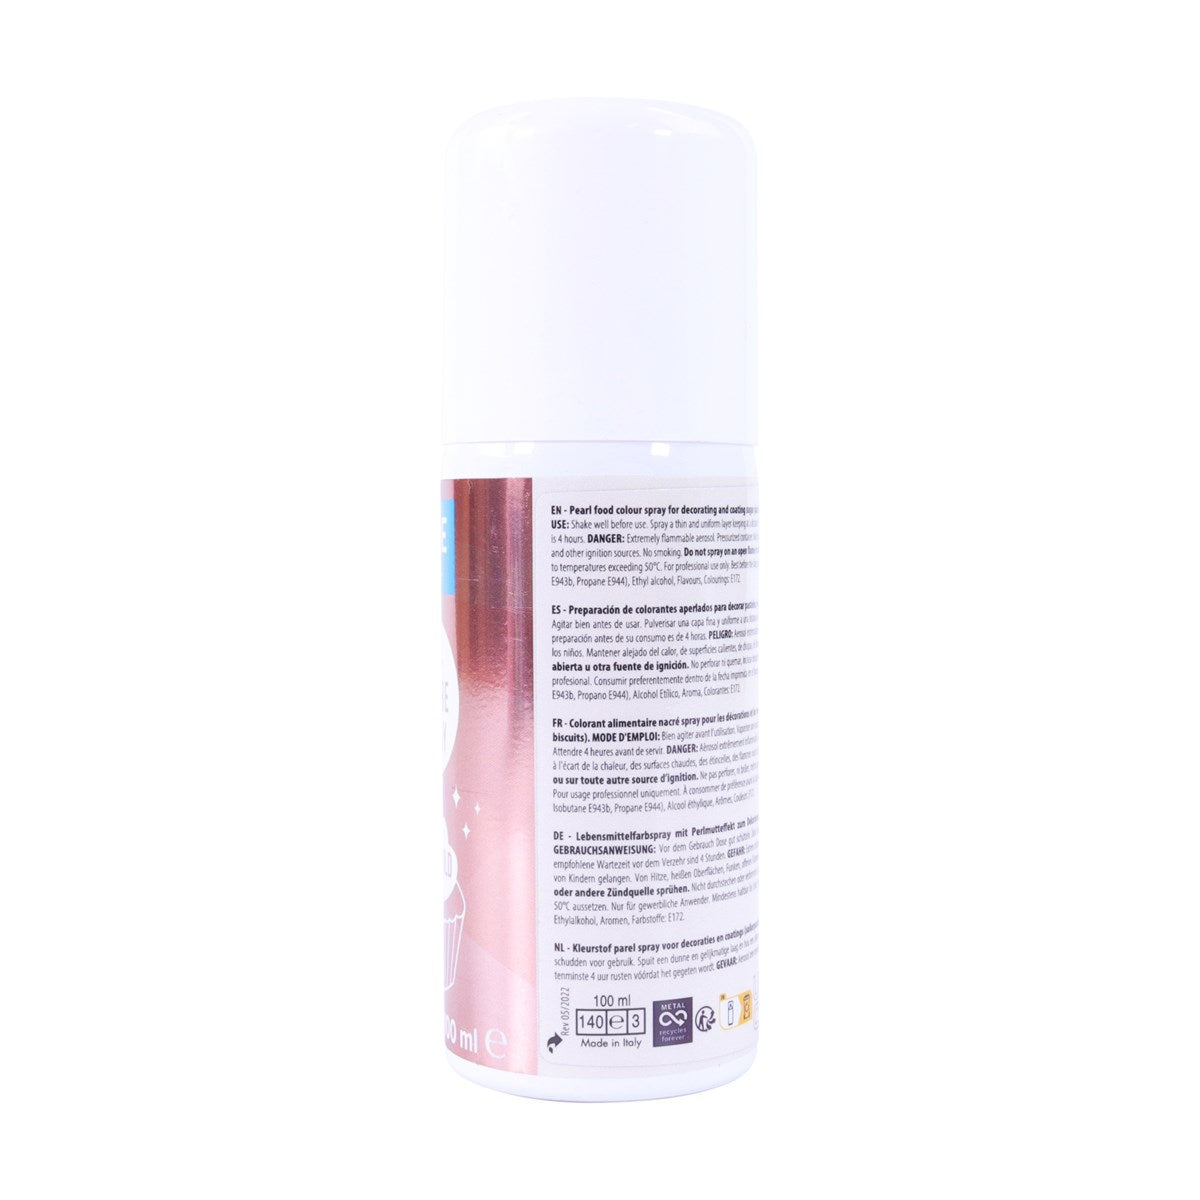 Bombe colorant alimentaire - Or rose Lustre - PME